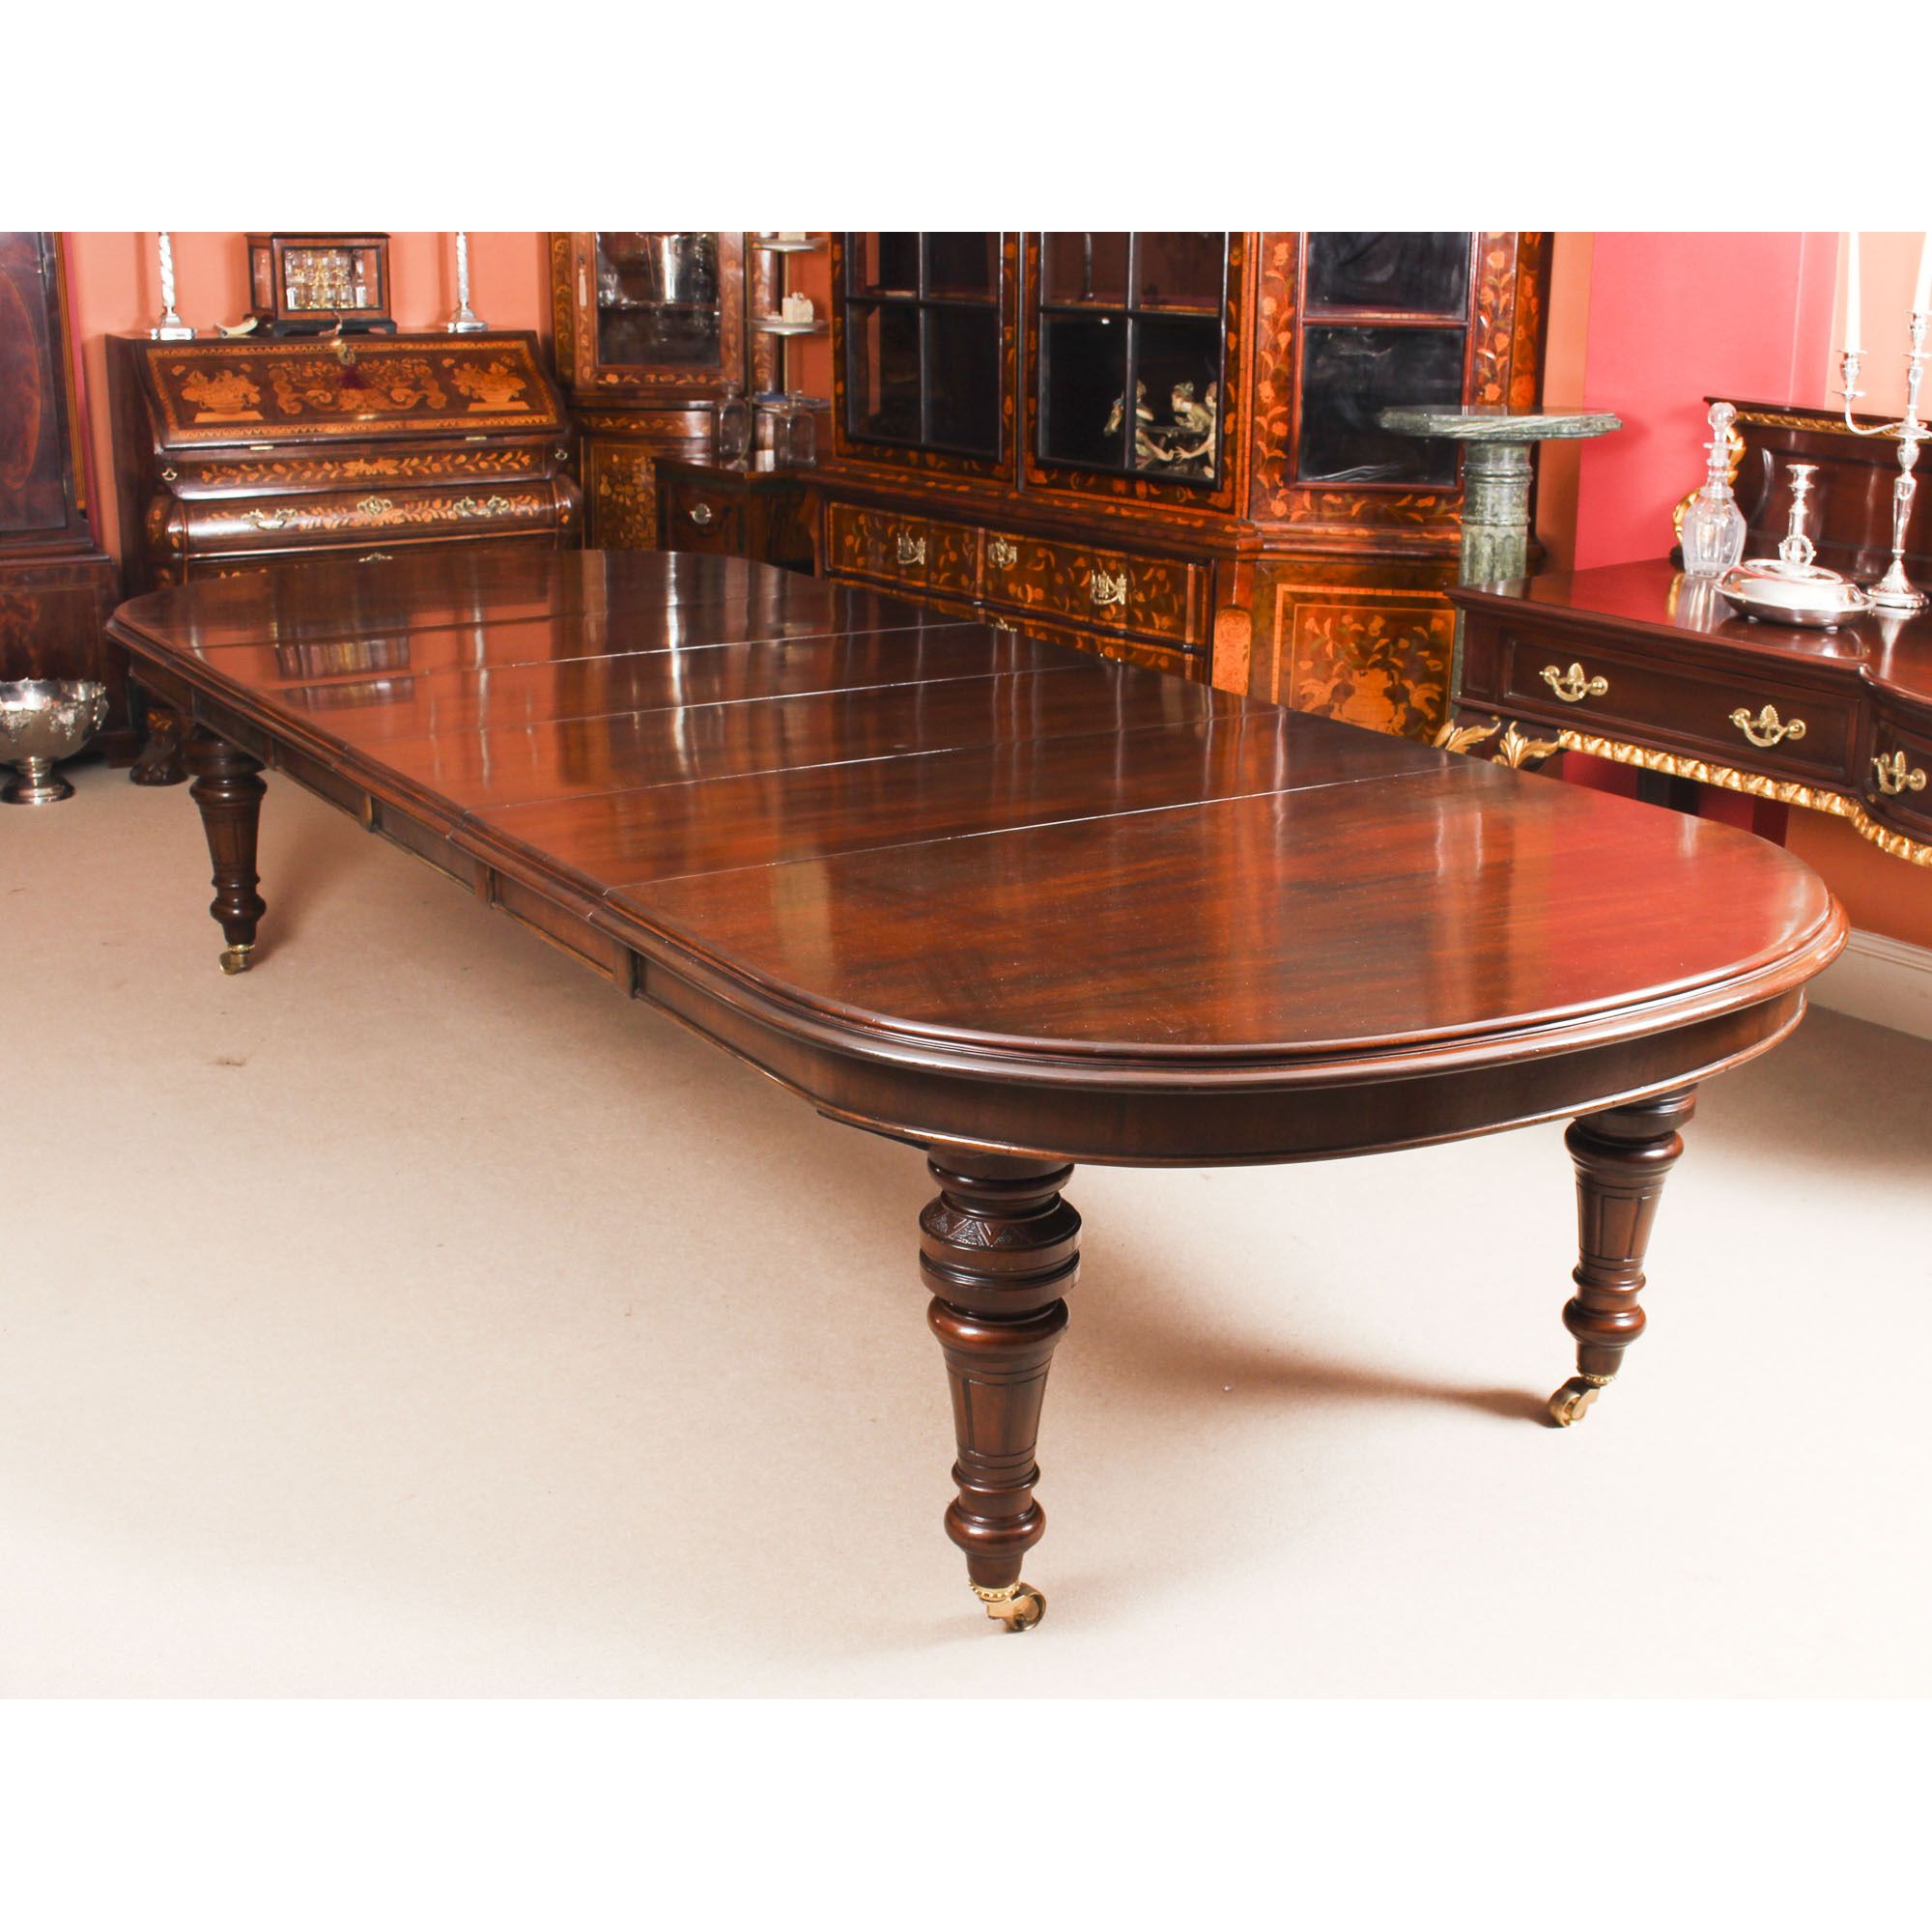 Antique Victorian Mahogany Extending Dining Table 19Th C In 2017 Rustic Mahogany Extending Dining Tables (View 8 of 25)